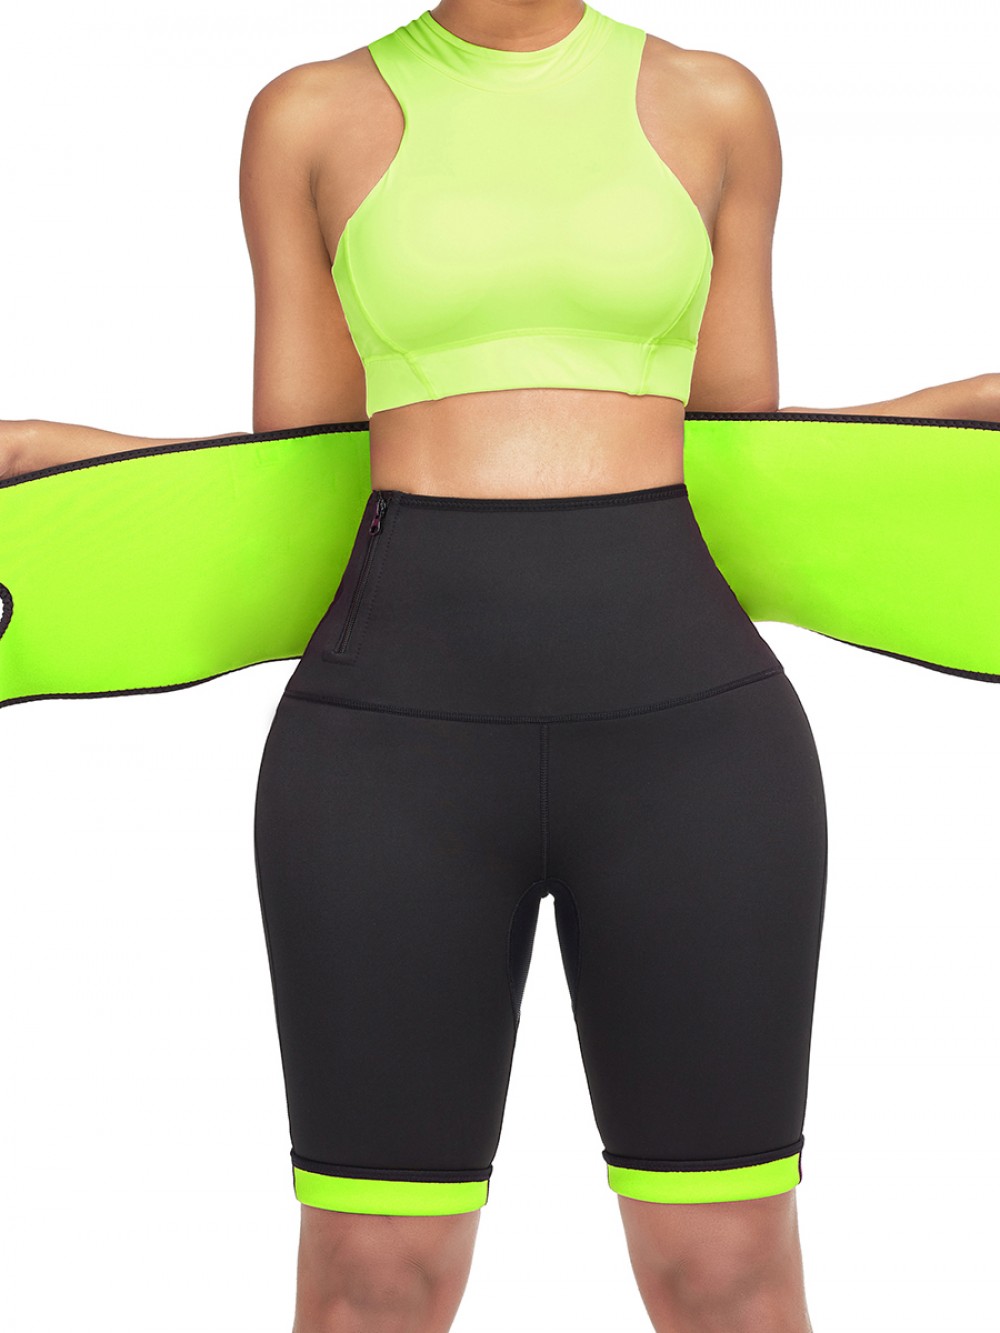 Green Shorts Shaper With Waist Belt Smooth Silhouette